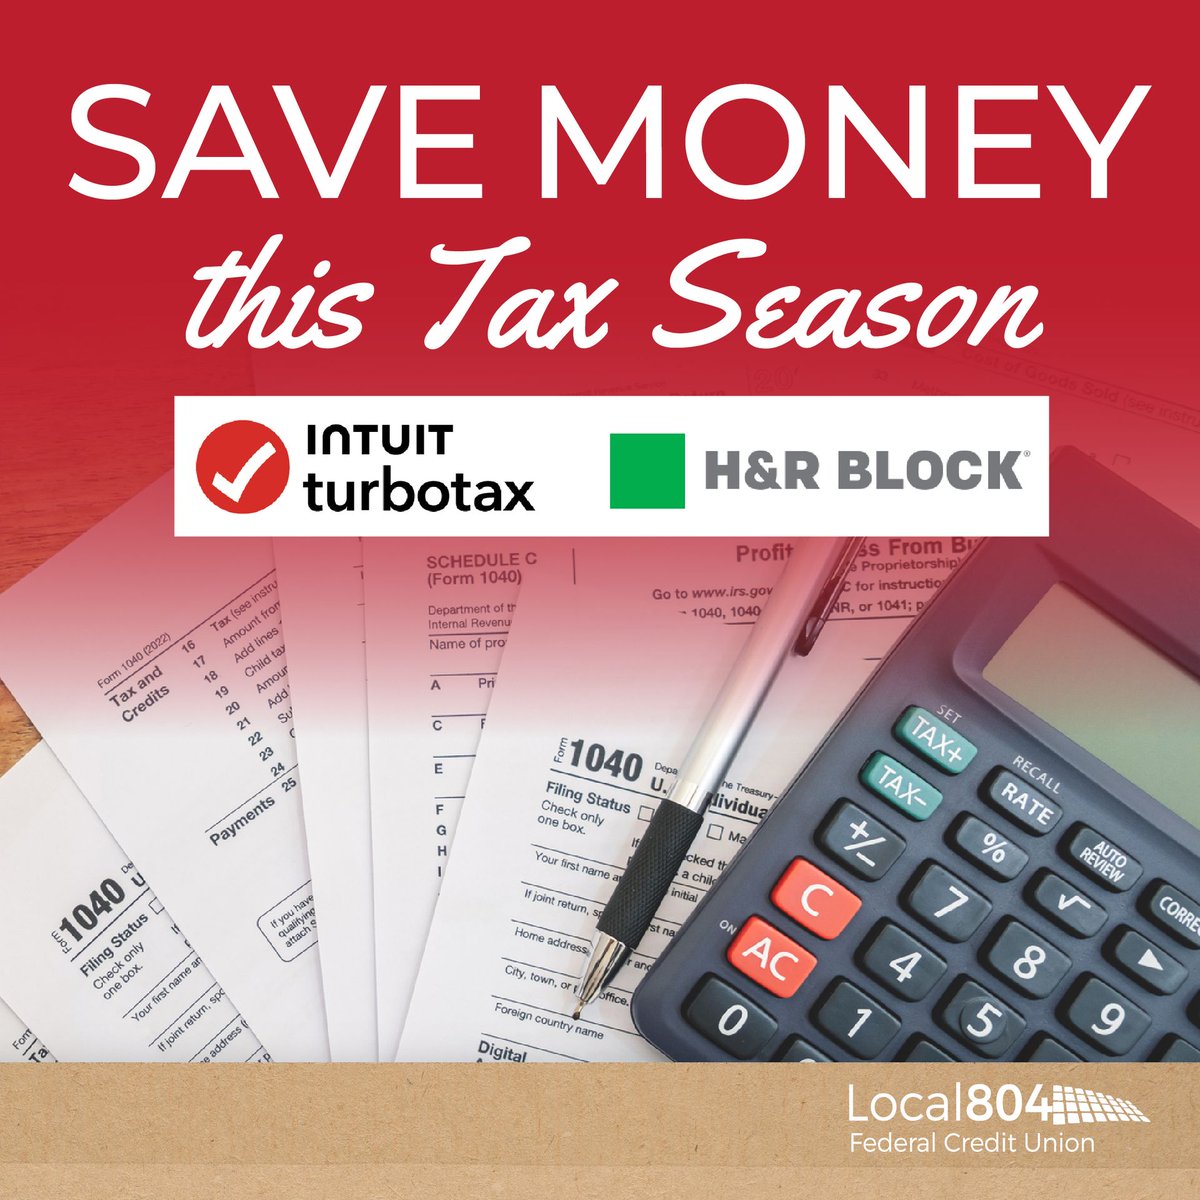 Get the most out of your Local 804 FCU membership this tax season! Enjoy members-only discounts on tax solutions to help simplify filing. Learn more - bit.ly/3TJdeSK

#TeamstersLocal804 #Teamsters #UPS #local447IAMAW @Teamsters_Local_804 @804_Local